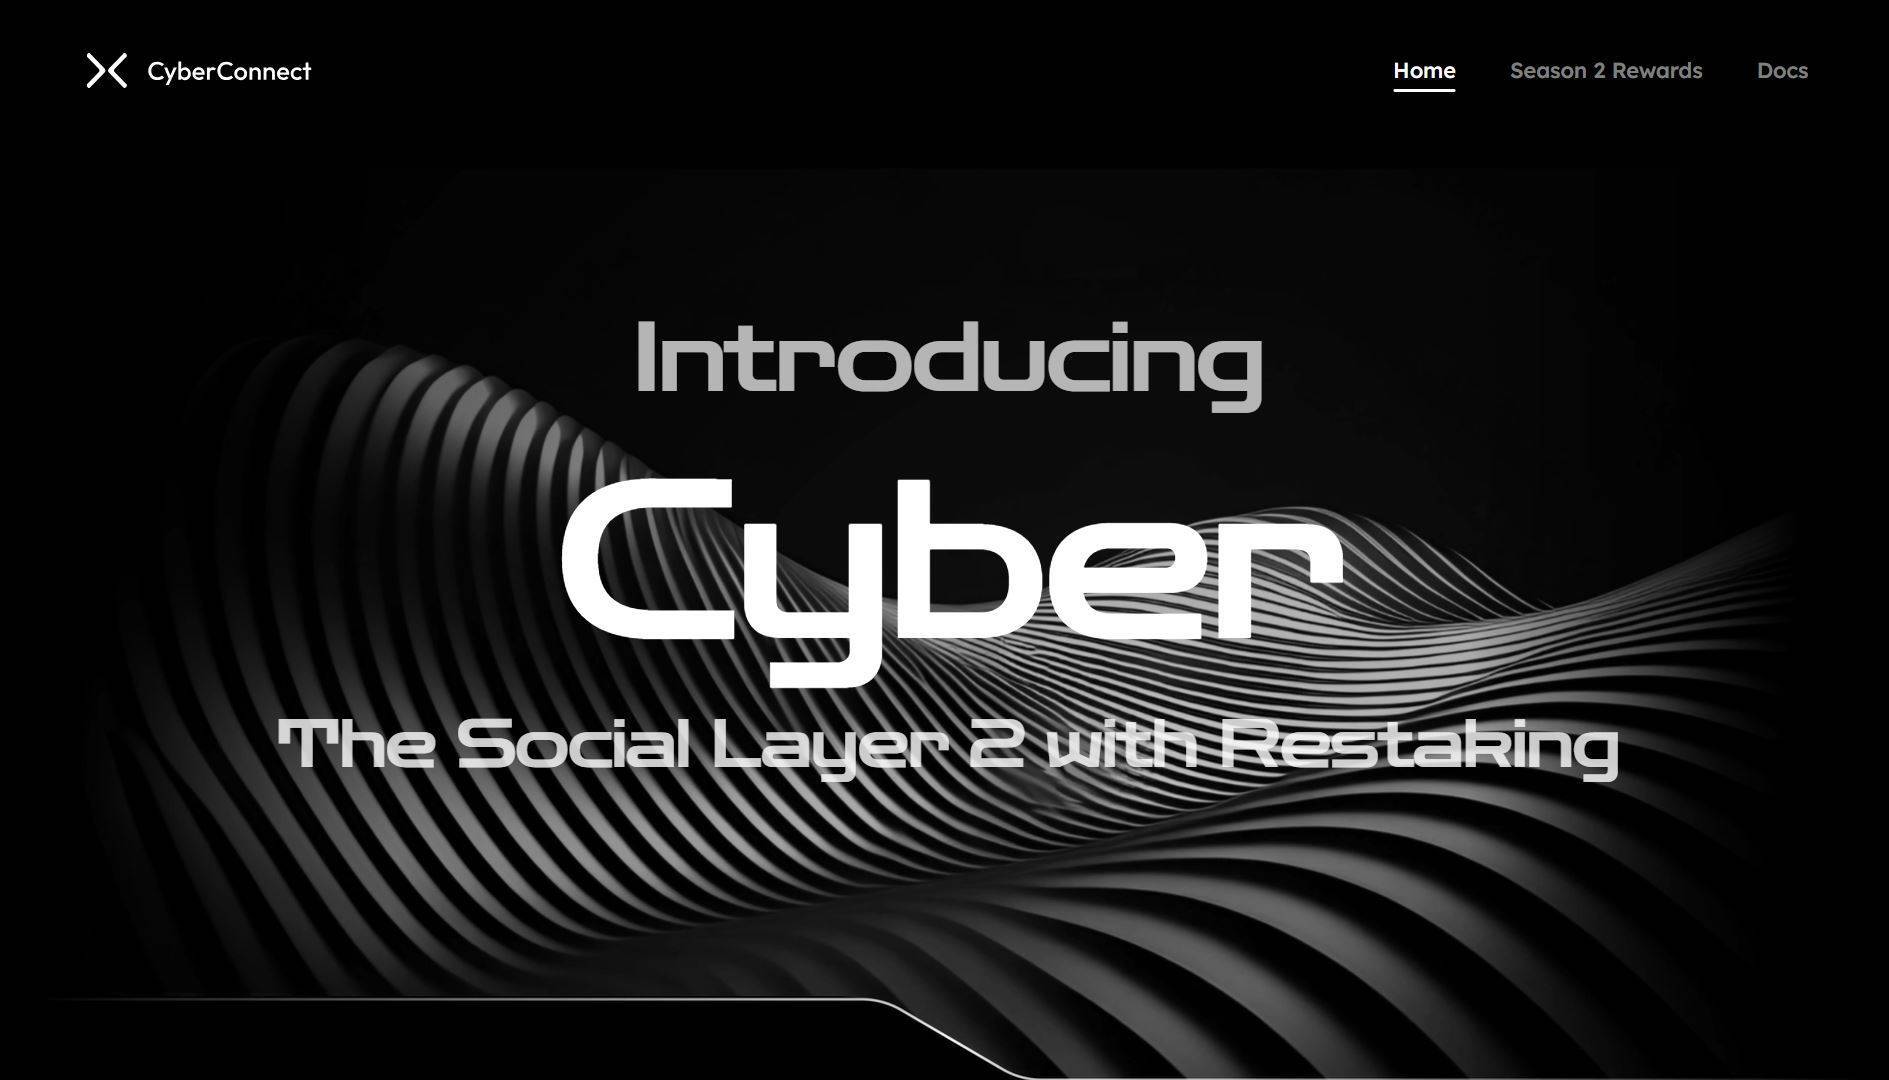 Cyberconnect Ra Mắt Cyber - Layer 2 Hỗ Trợ Restaking